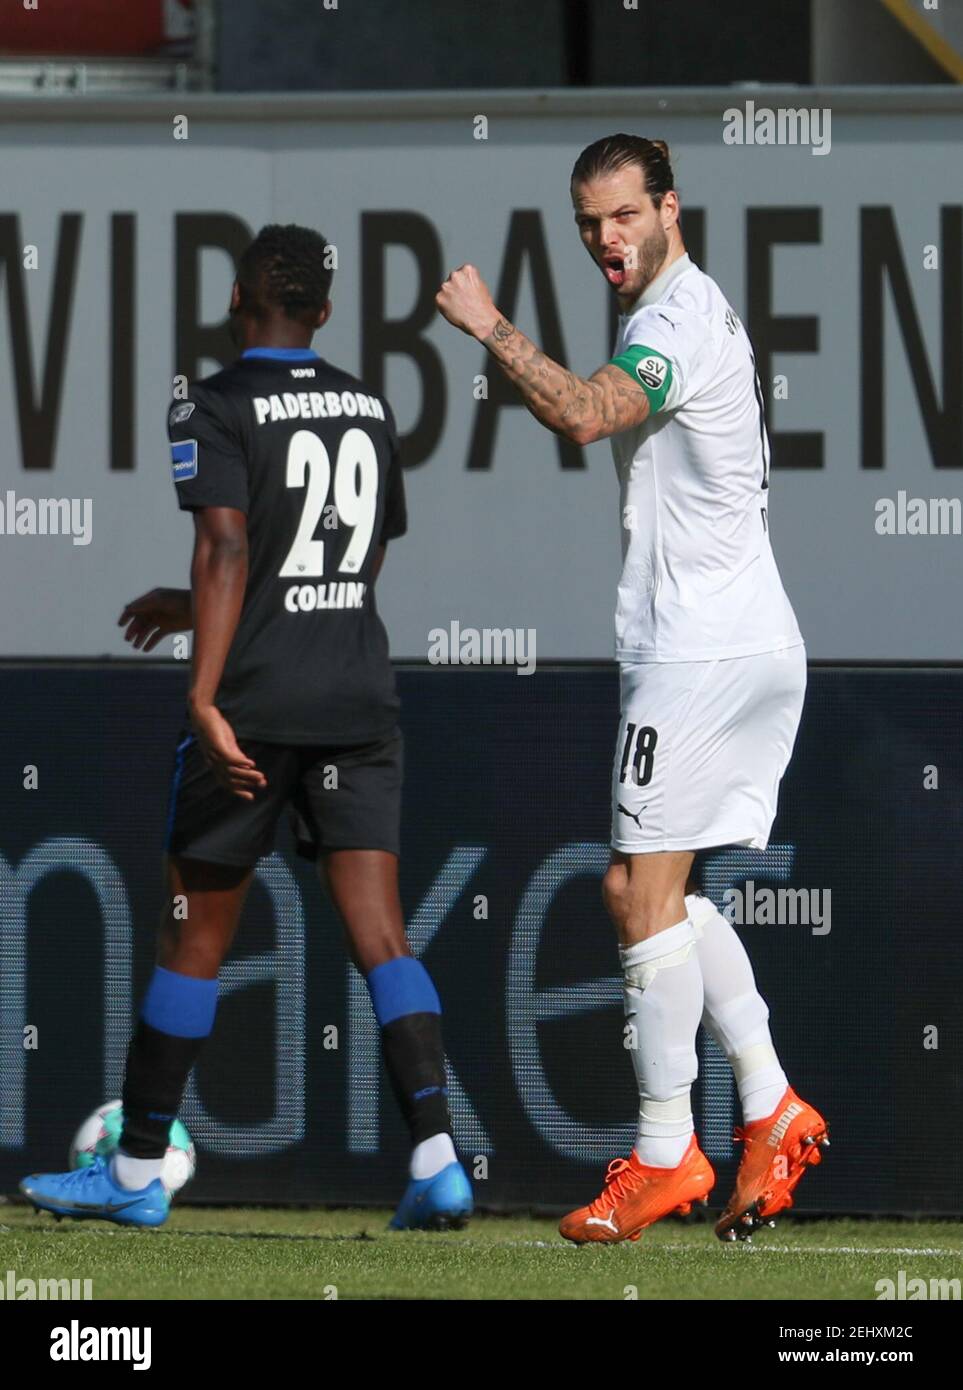 Paderborn, Germany. 20th Feb, 2021. Football: 2. Bundesliga, SC Paderborn 07 - SV Sandhausen, Matchday 22 at Benteler-Arena. Dennis Diekmeier (r) from Sandhausen raises his fist. Credit: Friso Gentsch/dpa - IMPORTANT NOTE: In accordance with the regulations of the DFL Deutsche Fußball Liga and/or the DFB Deutscher Fußball-Bund, it is prohibited to use or have used photographs taken in the stadium and/or of the match in the form of sequence pictures and/or video-like photo series./dpa/Alamy Live News Stock Photo